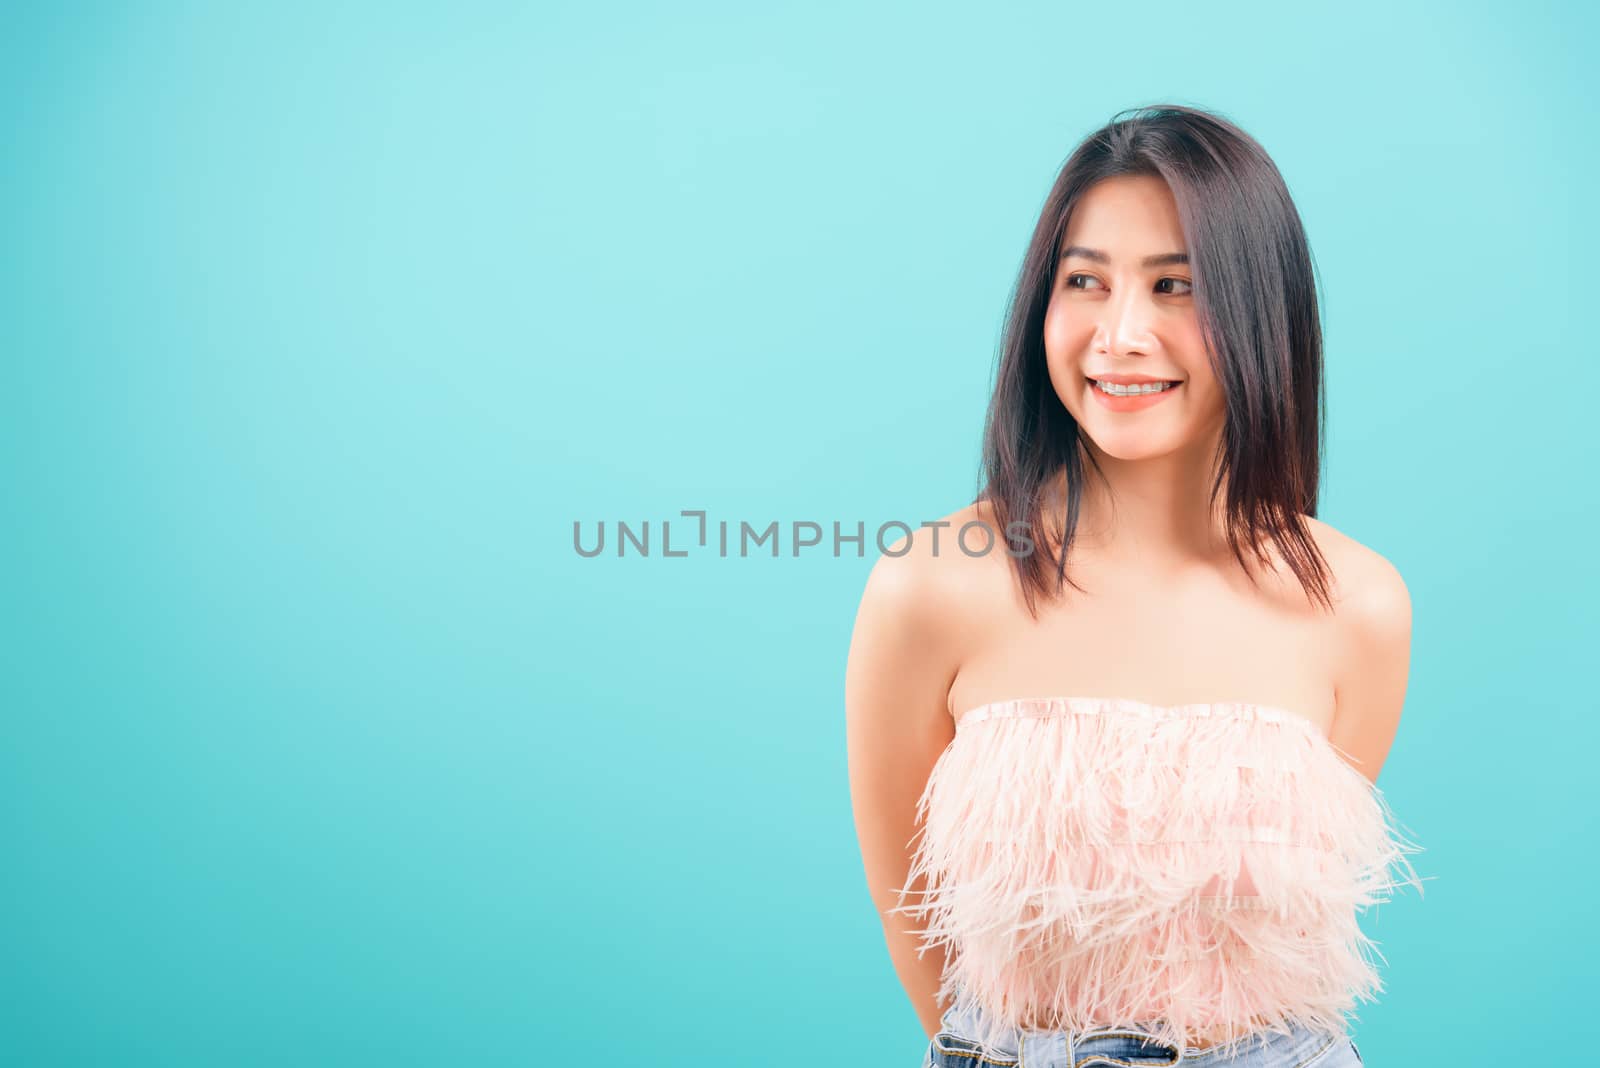 Portrait asian beautiful woman smiling her looking out on blue background, with copy space for text